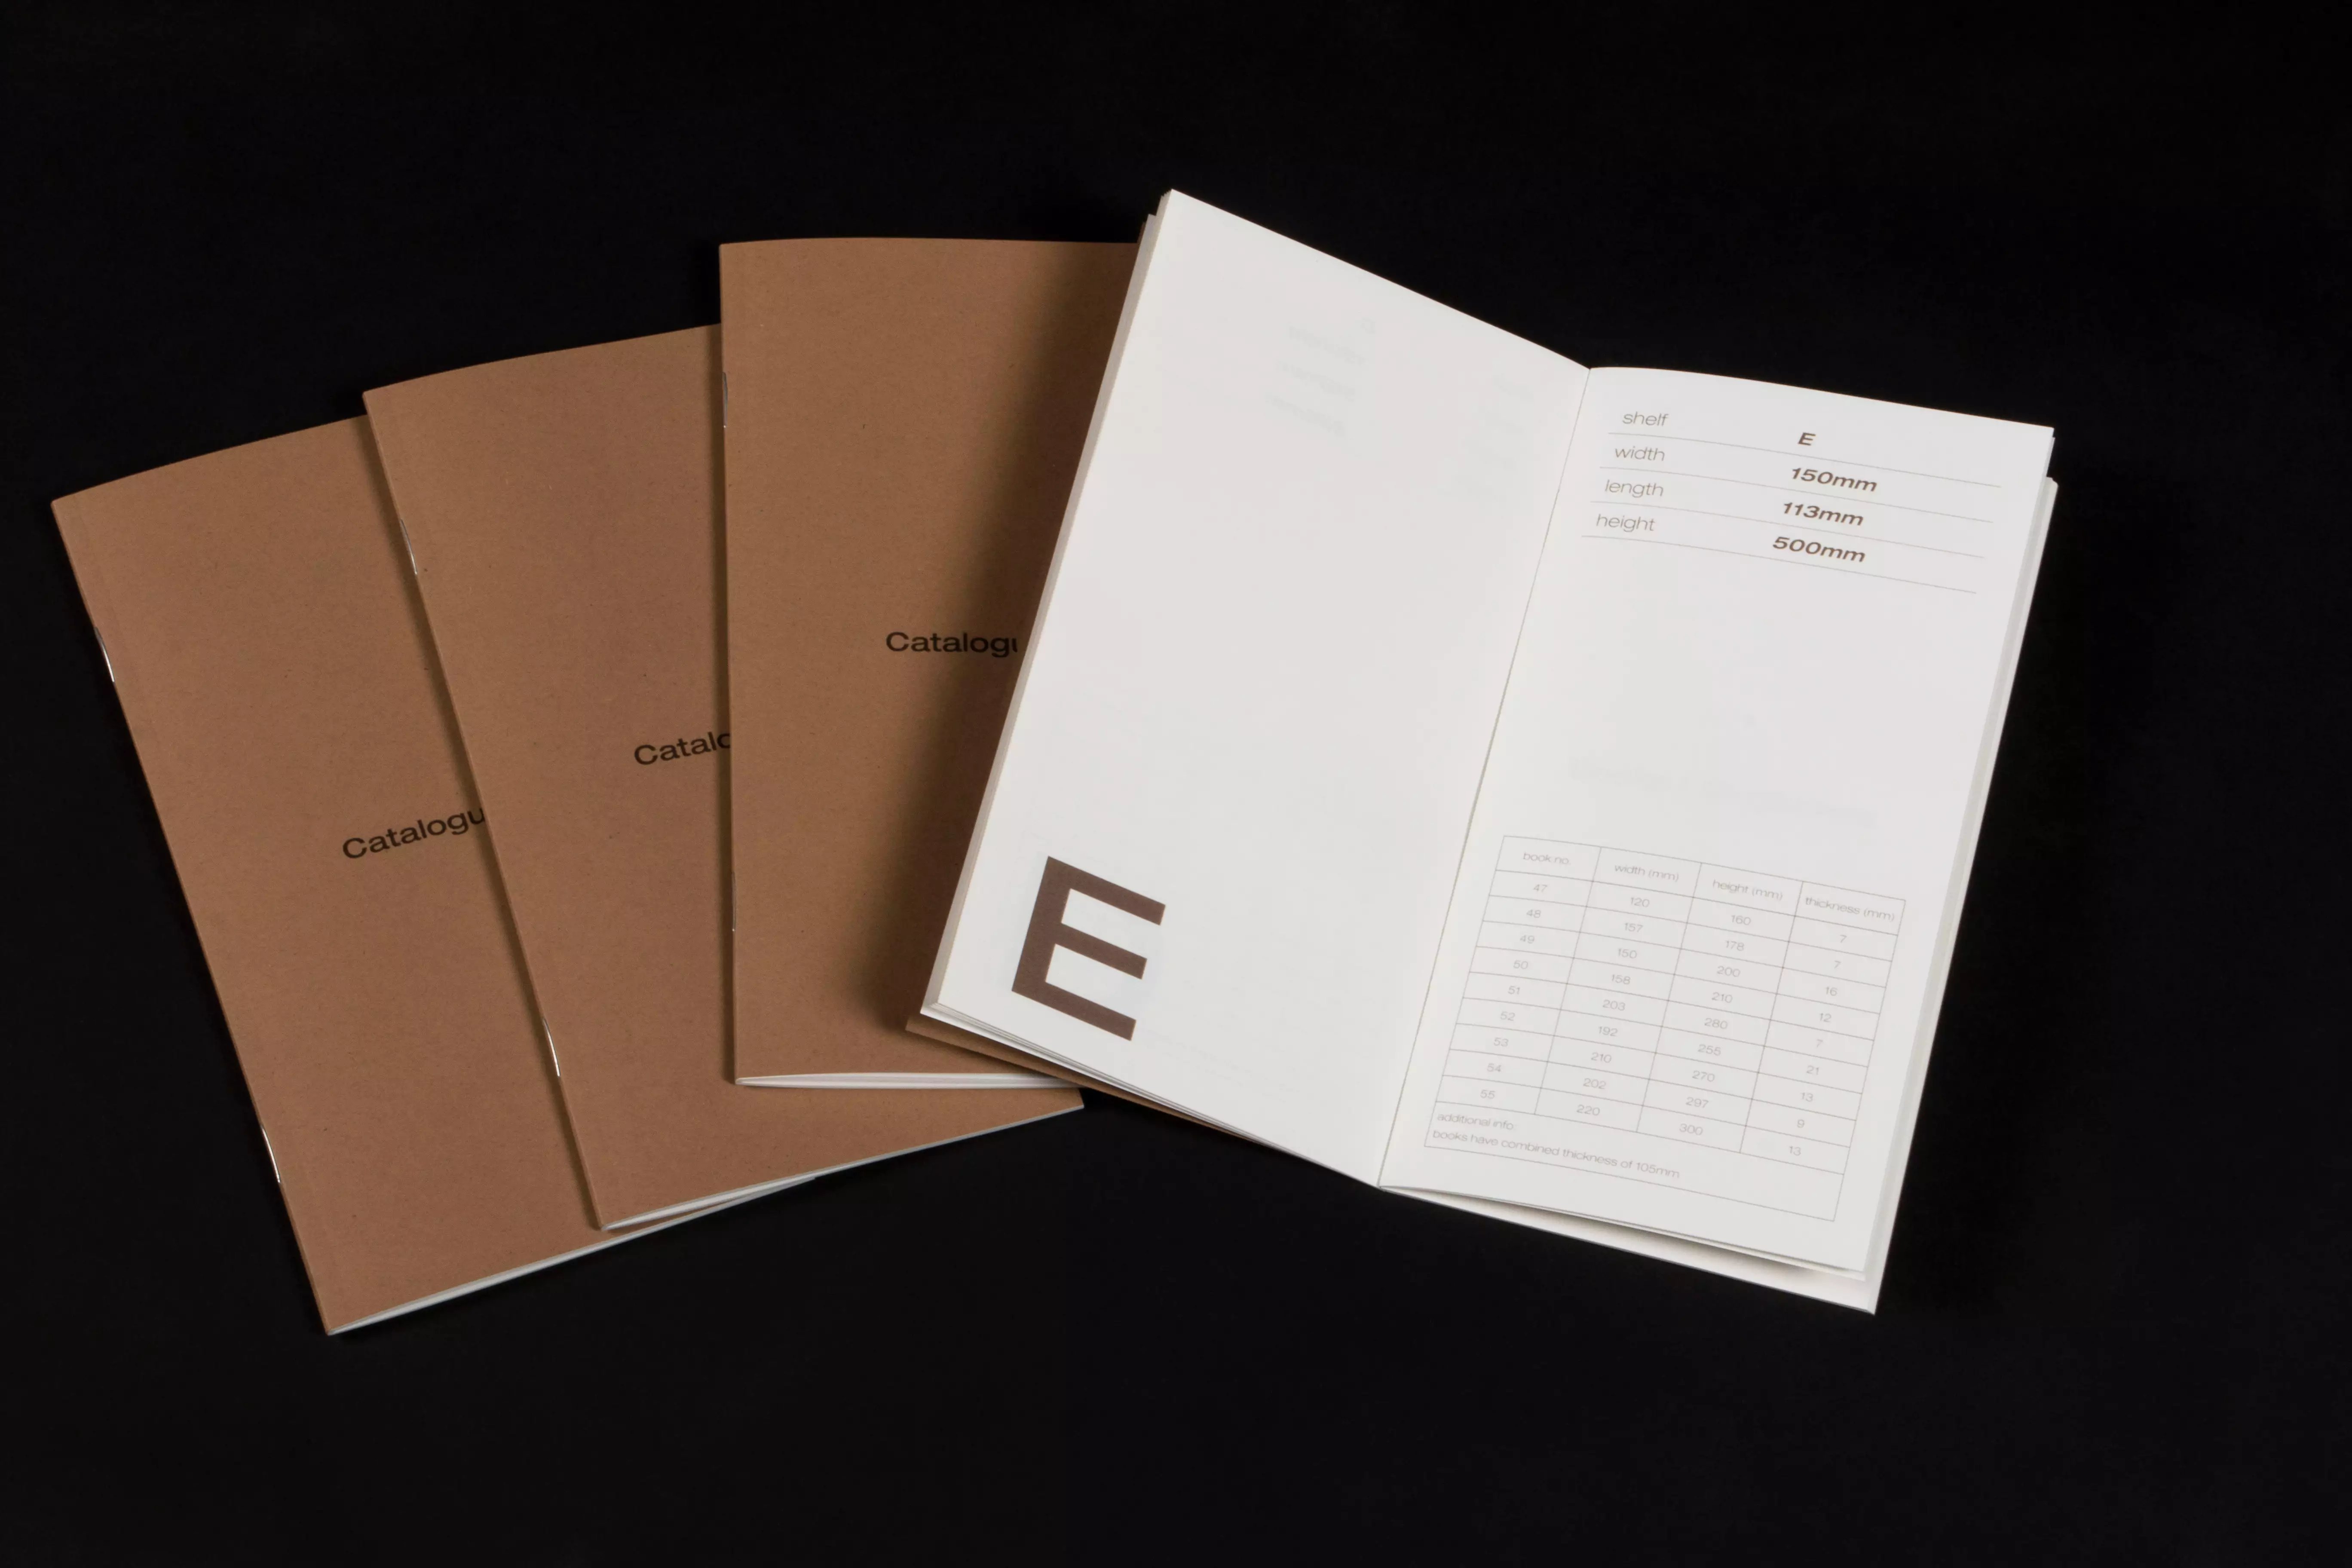 Four catalogues with brown covers that read 'catalogue' on the front. One of the catalogues lays open.